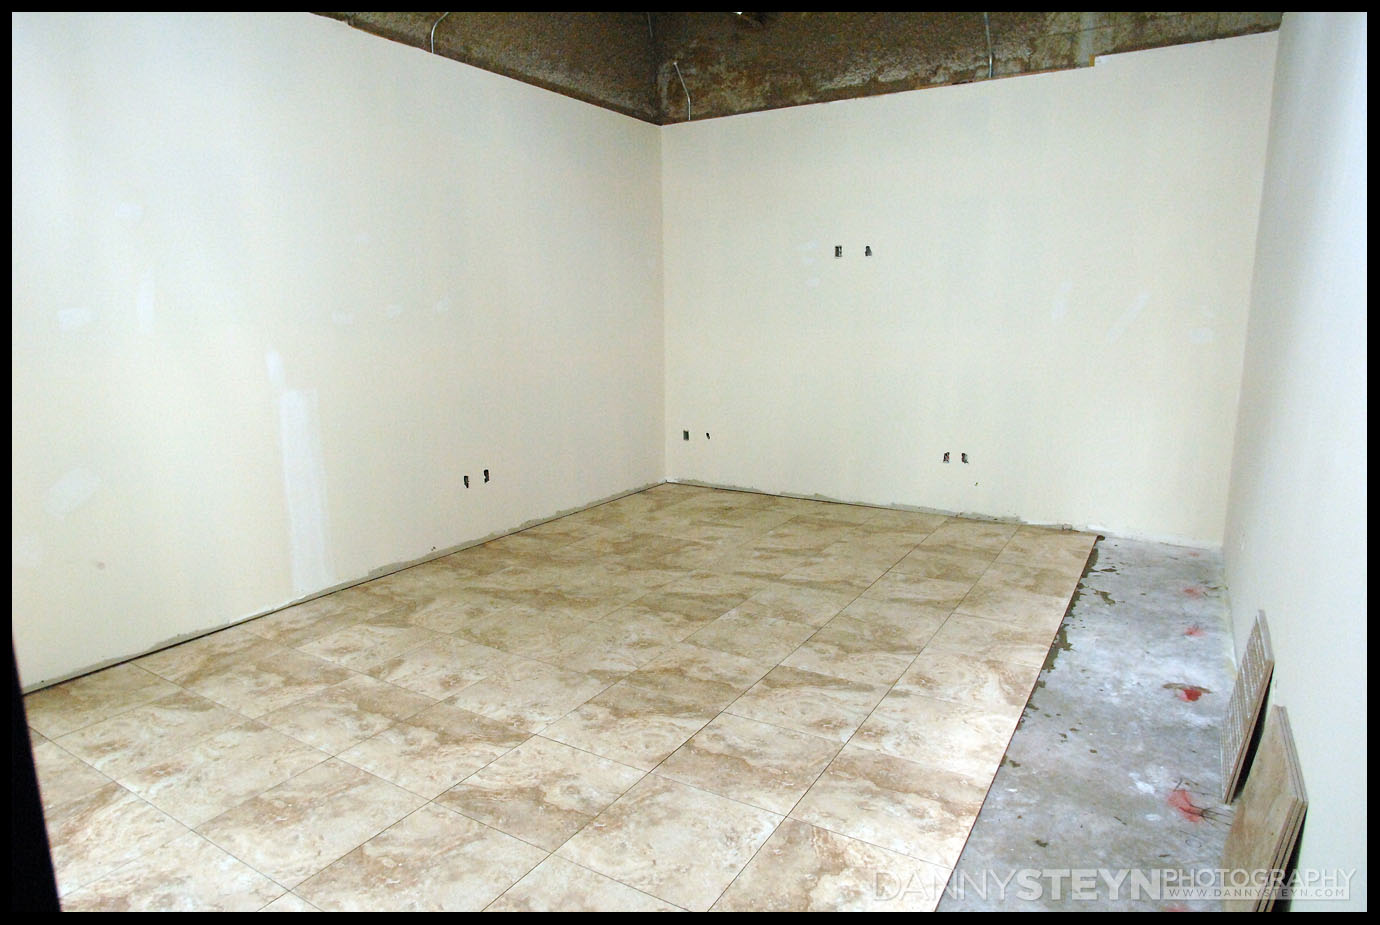 New Photography Studio construction - Editing Office tiling underway